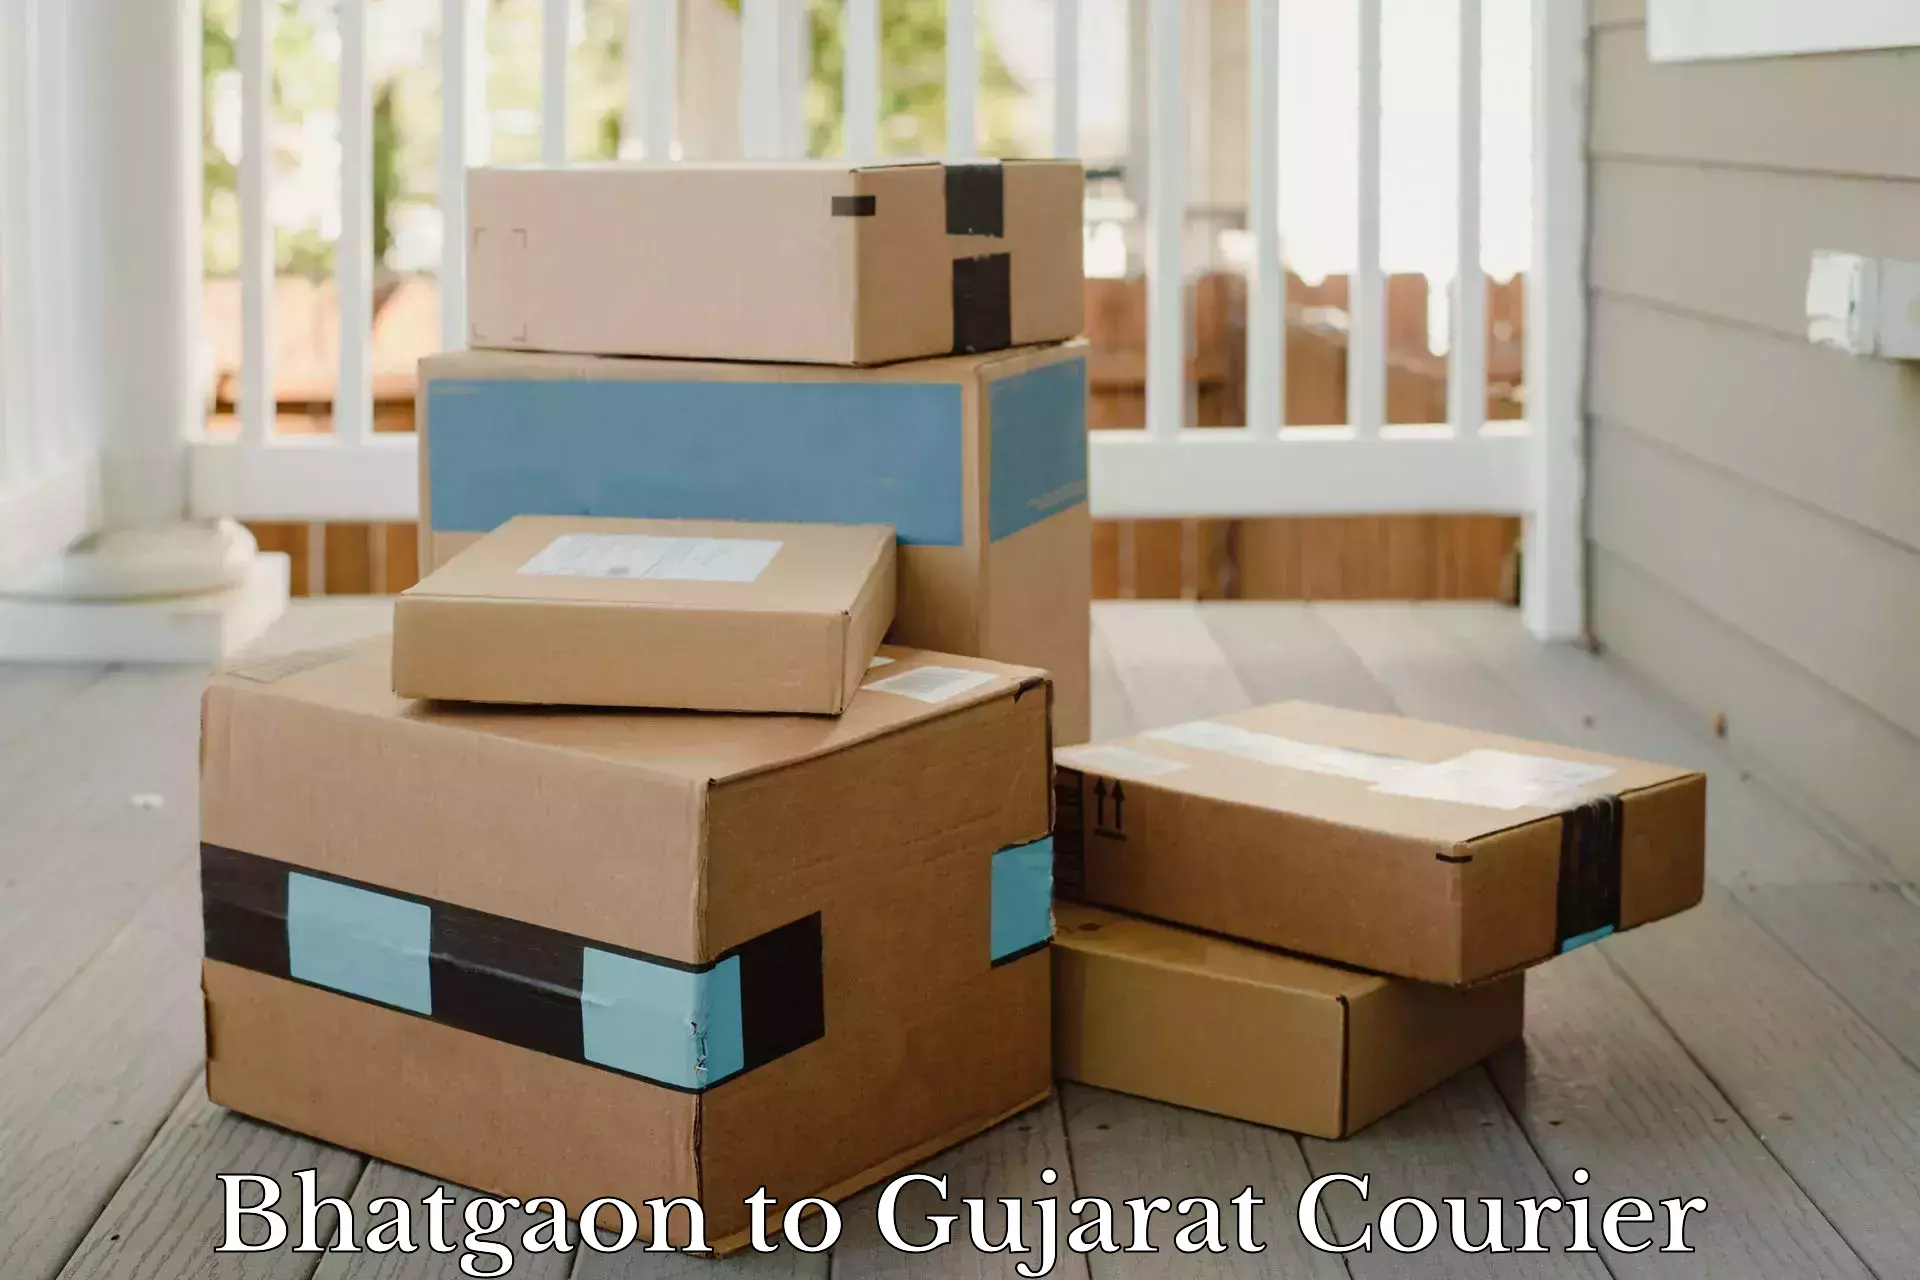 24-hour courier services Bhatgaon to Rajkot